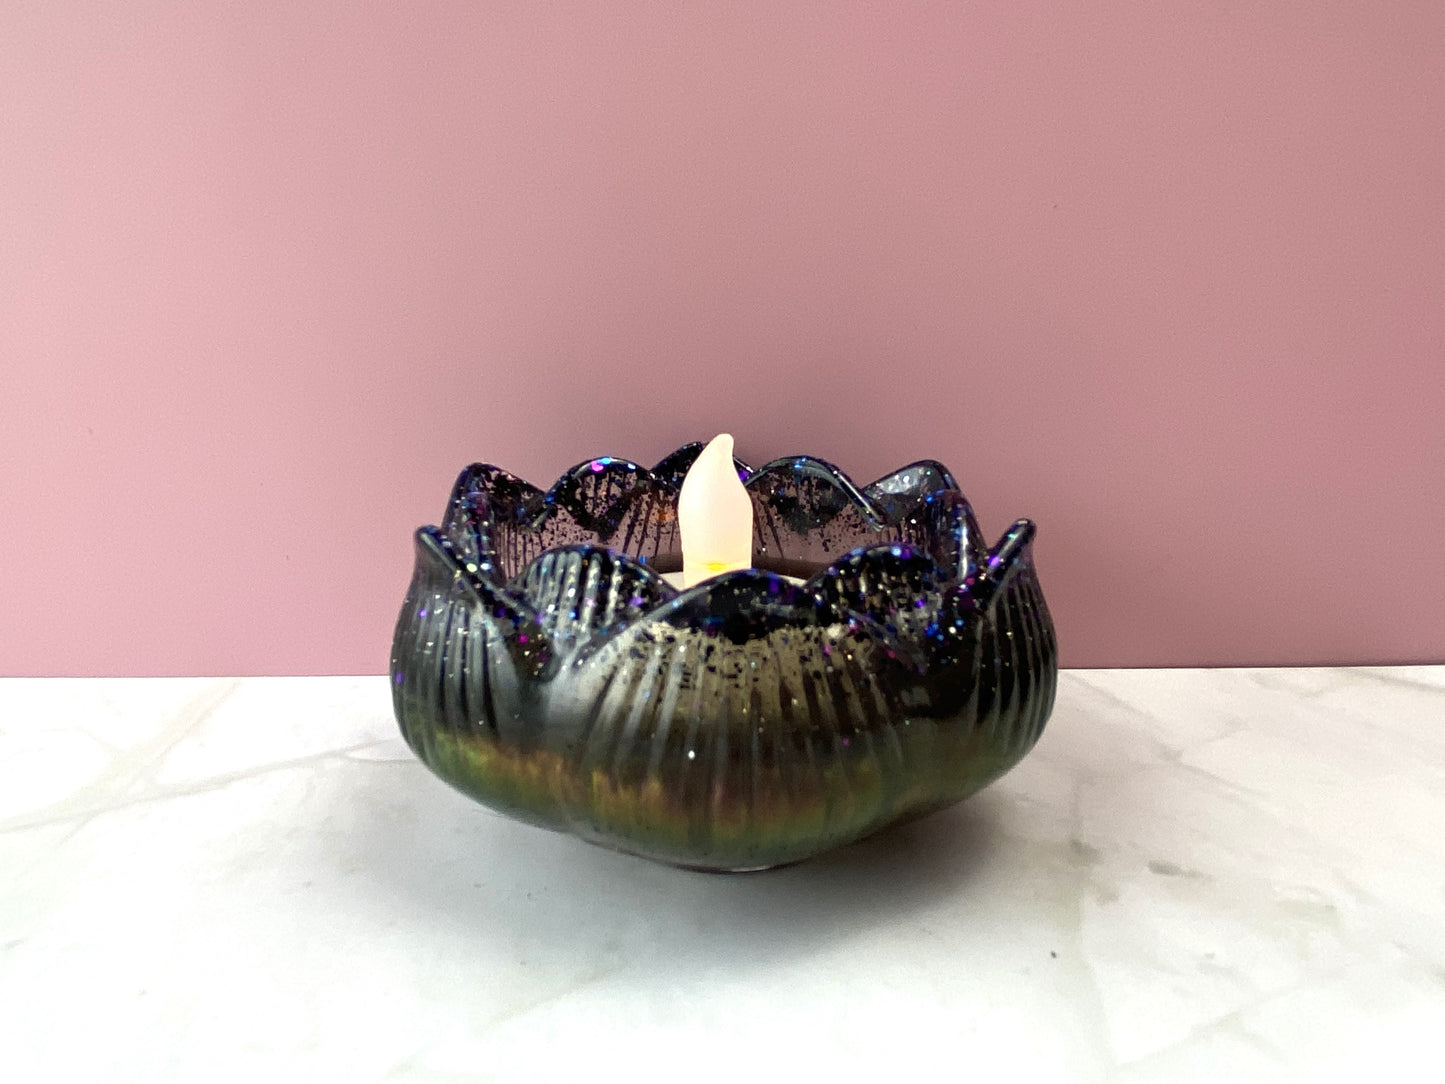 Teal Pearl & Black Glitter Butterfly Lotus Candle Holder | Handmade Home Decor